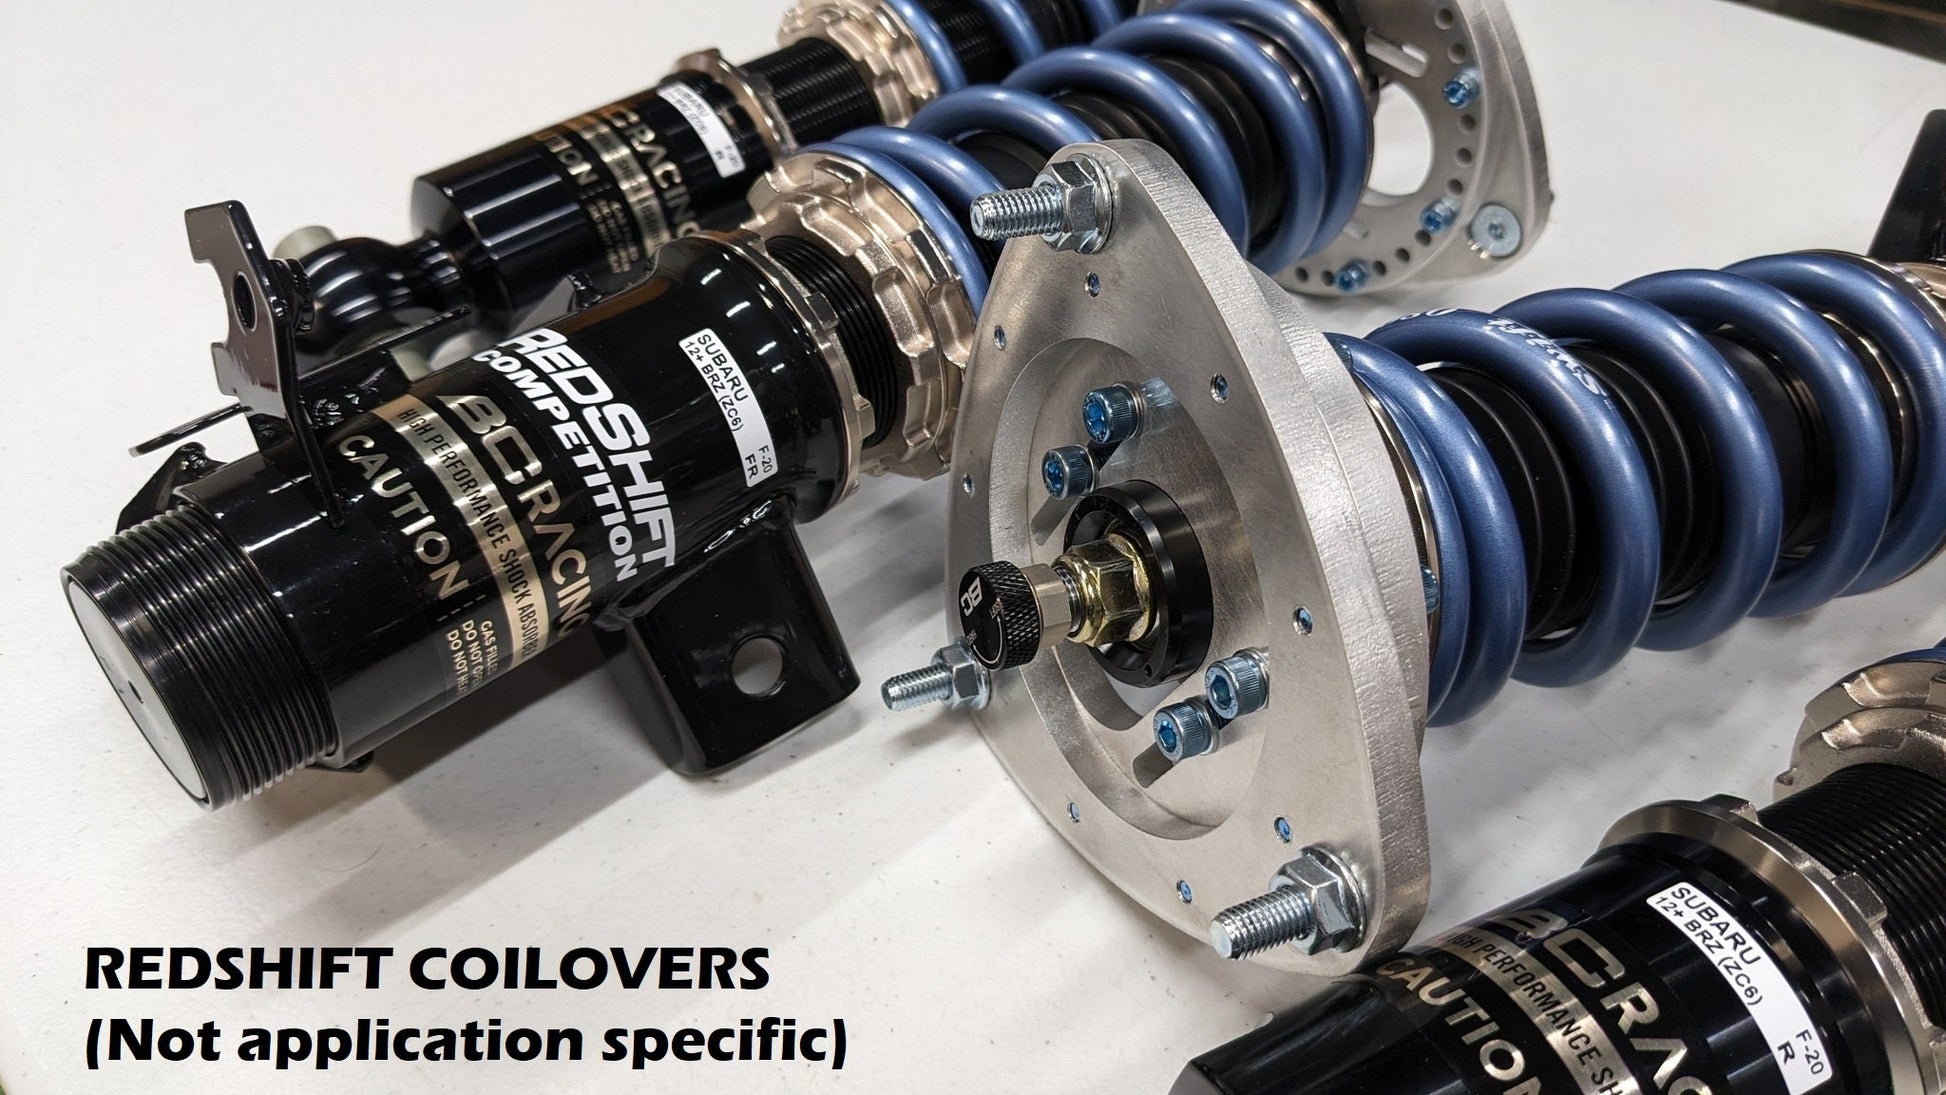 RedShift Competition Coilovers